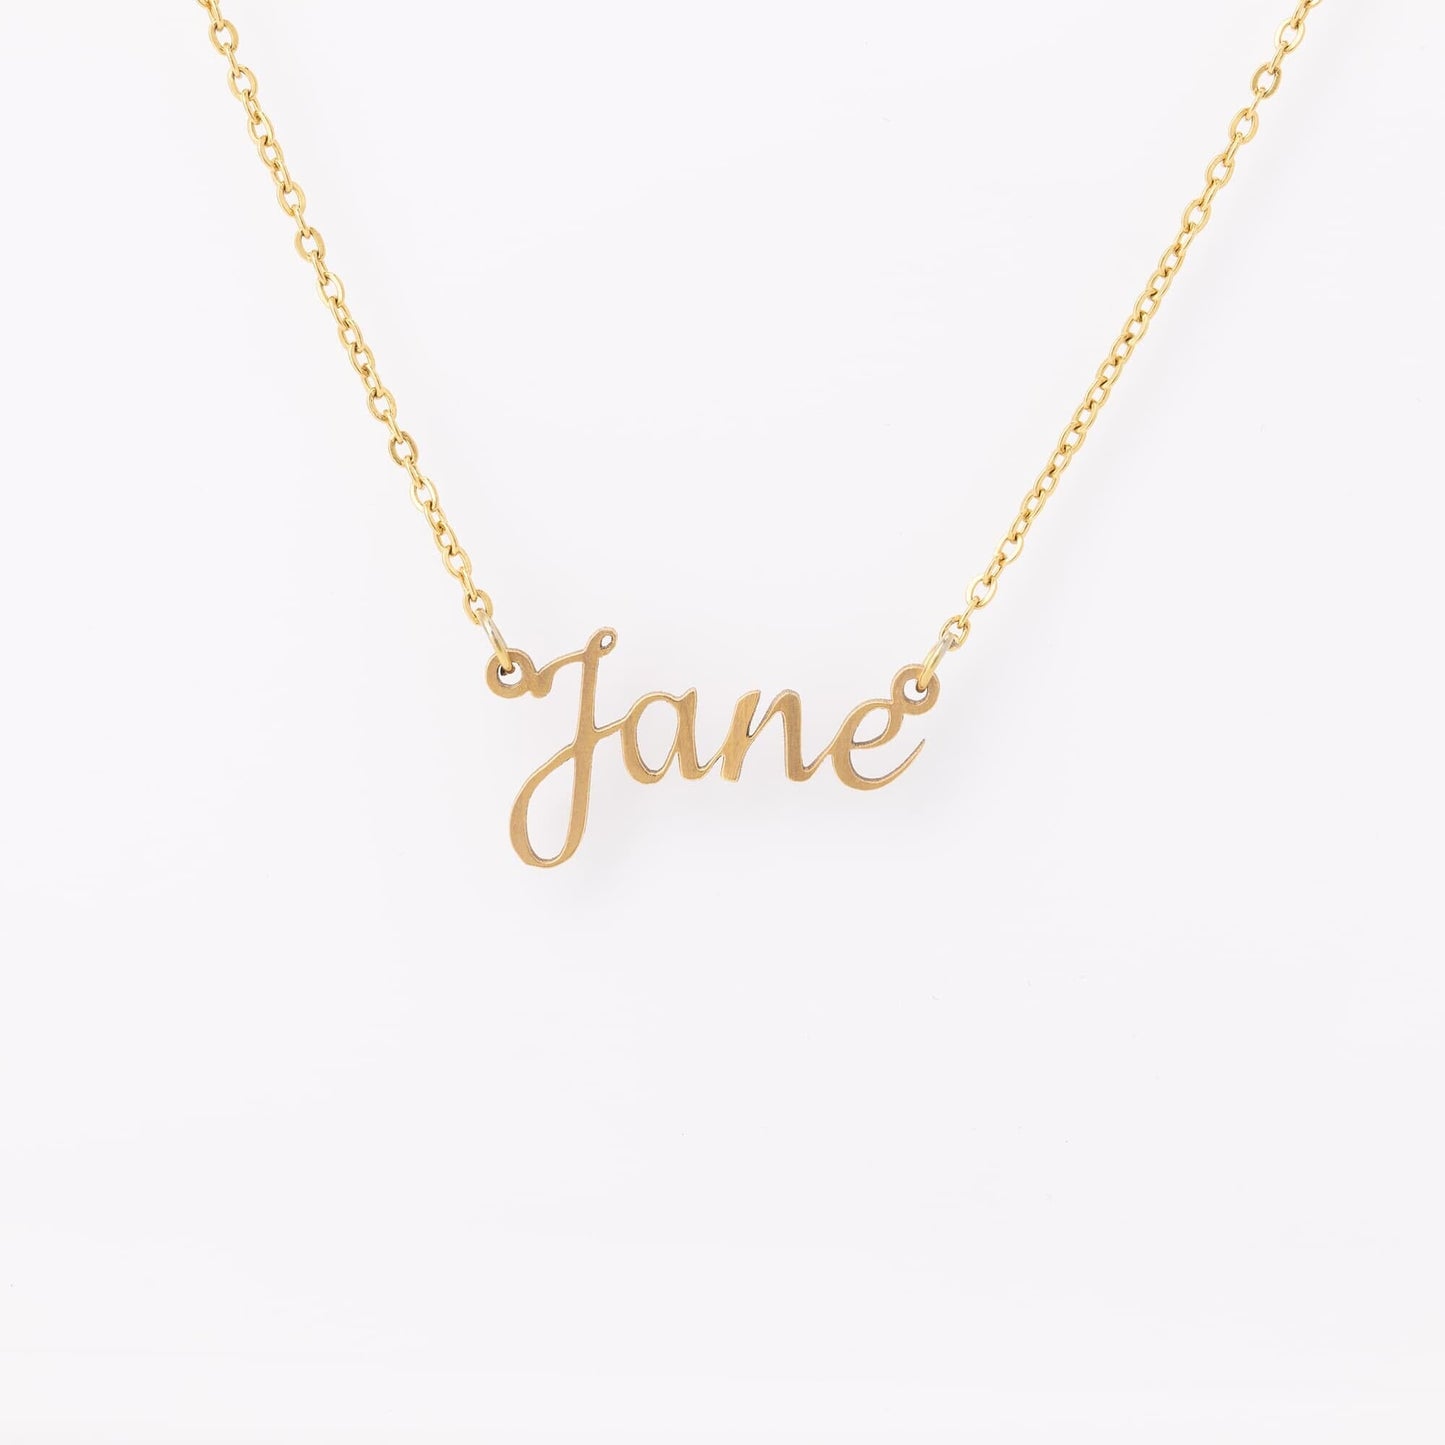 Beautiful Custom Name Necklace - Silver, Rose Gold, or Gold Jewelry 